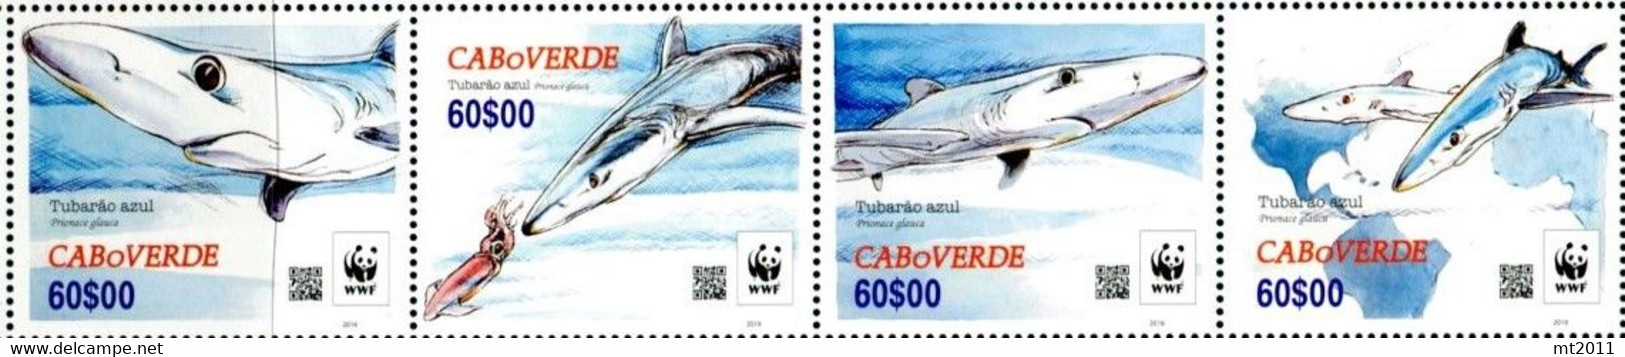 CAP VERT / CABO VERDE 2016 MNH - " WWF FAUNE MARINE REQUINS / SHARKS  WWF " -  STRIP Of  4 VAL. - Unused Stamps